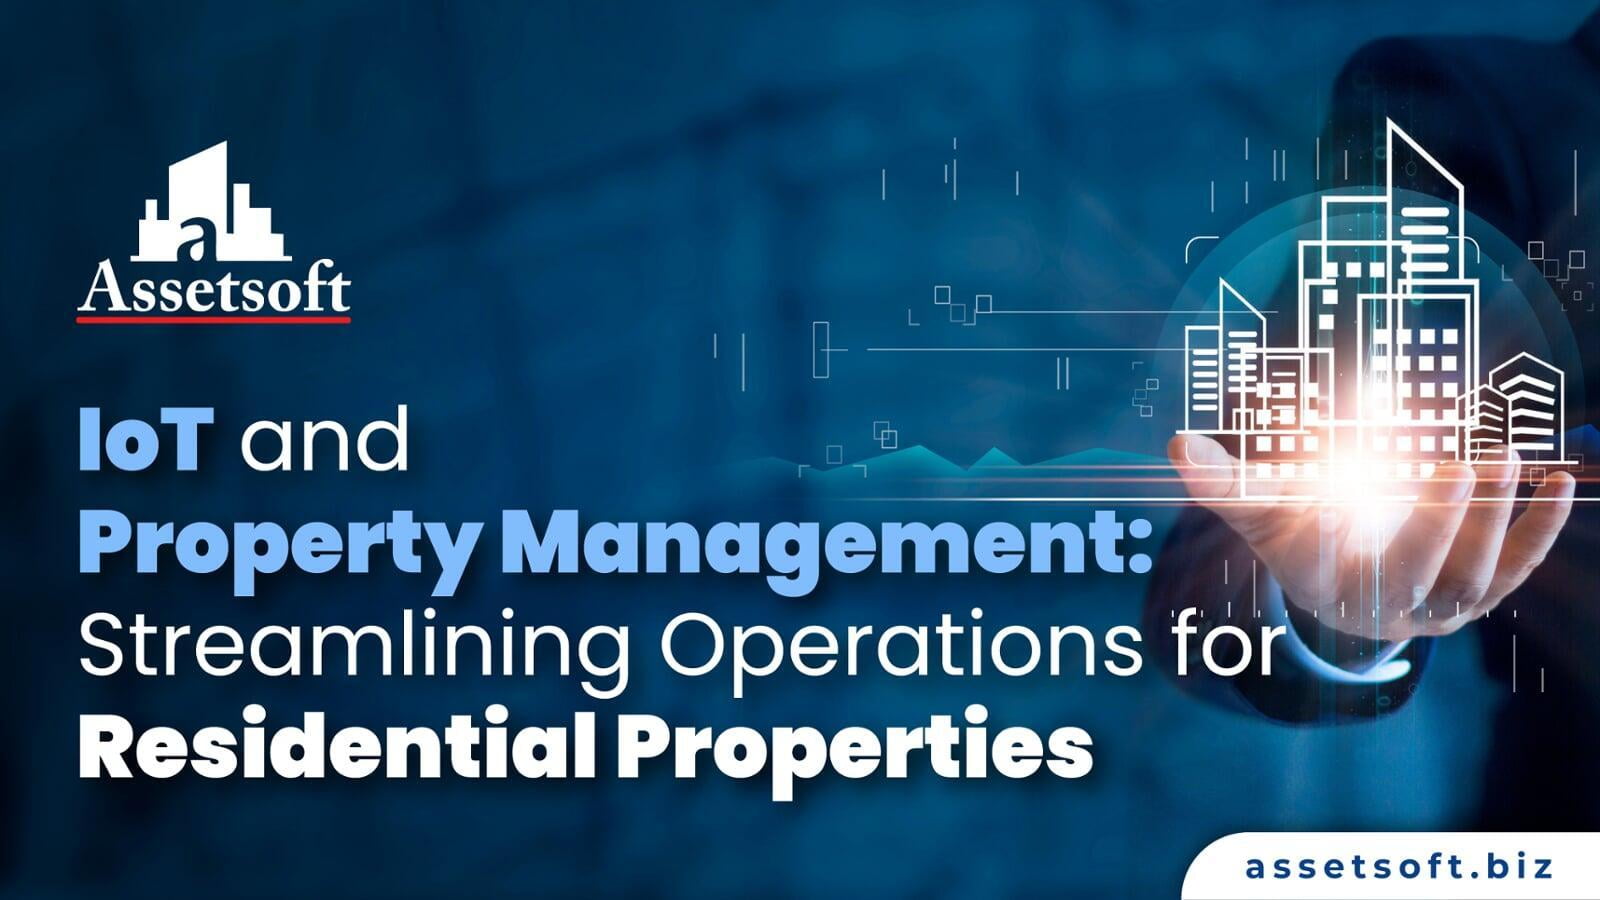 IoT and Property Management: Streamlining Operations for Residential Properties 